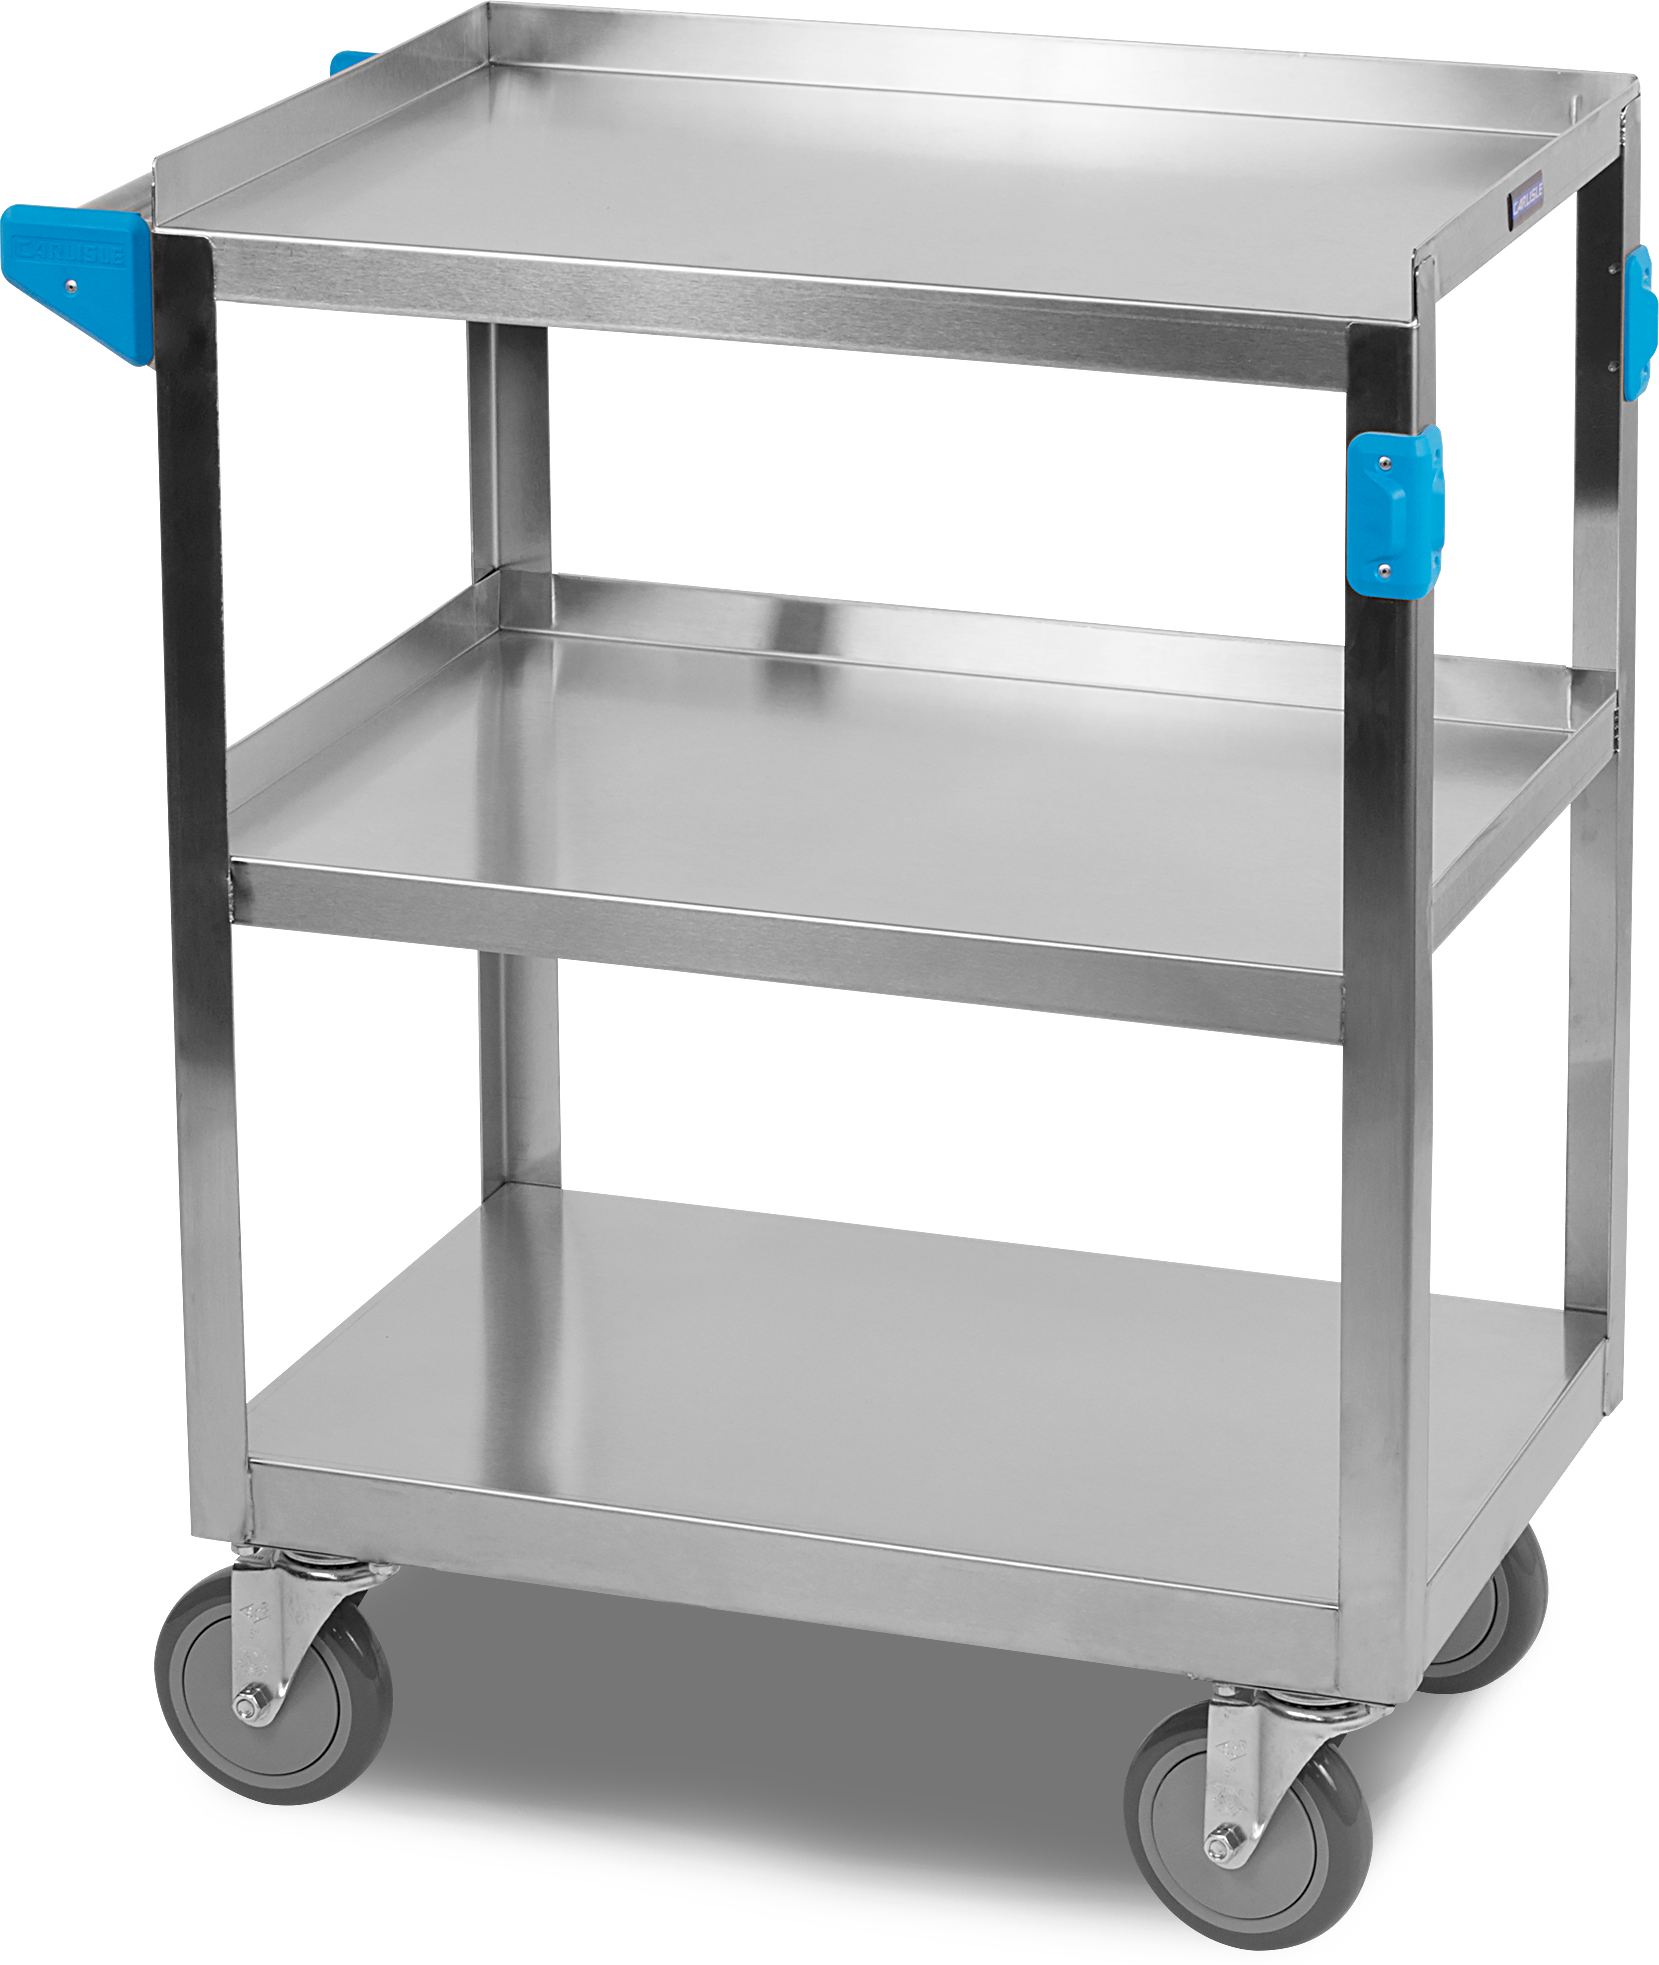 3 Shelf Stainless Steel Utility Cart 300 lb Capacity 15.5 x 24W - Stainless Steel